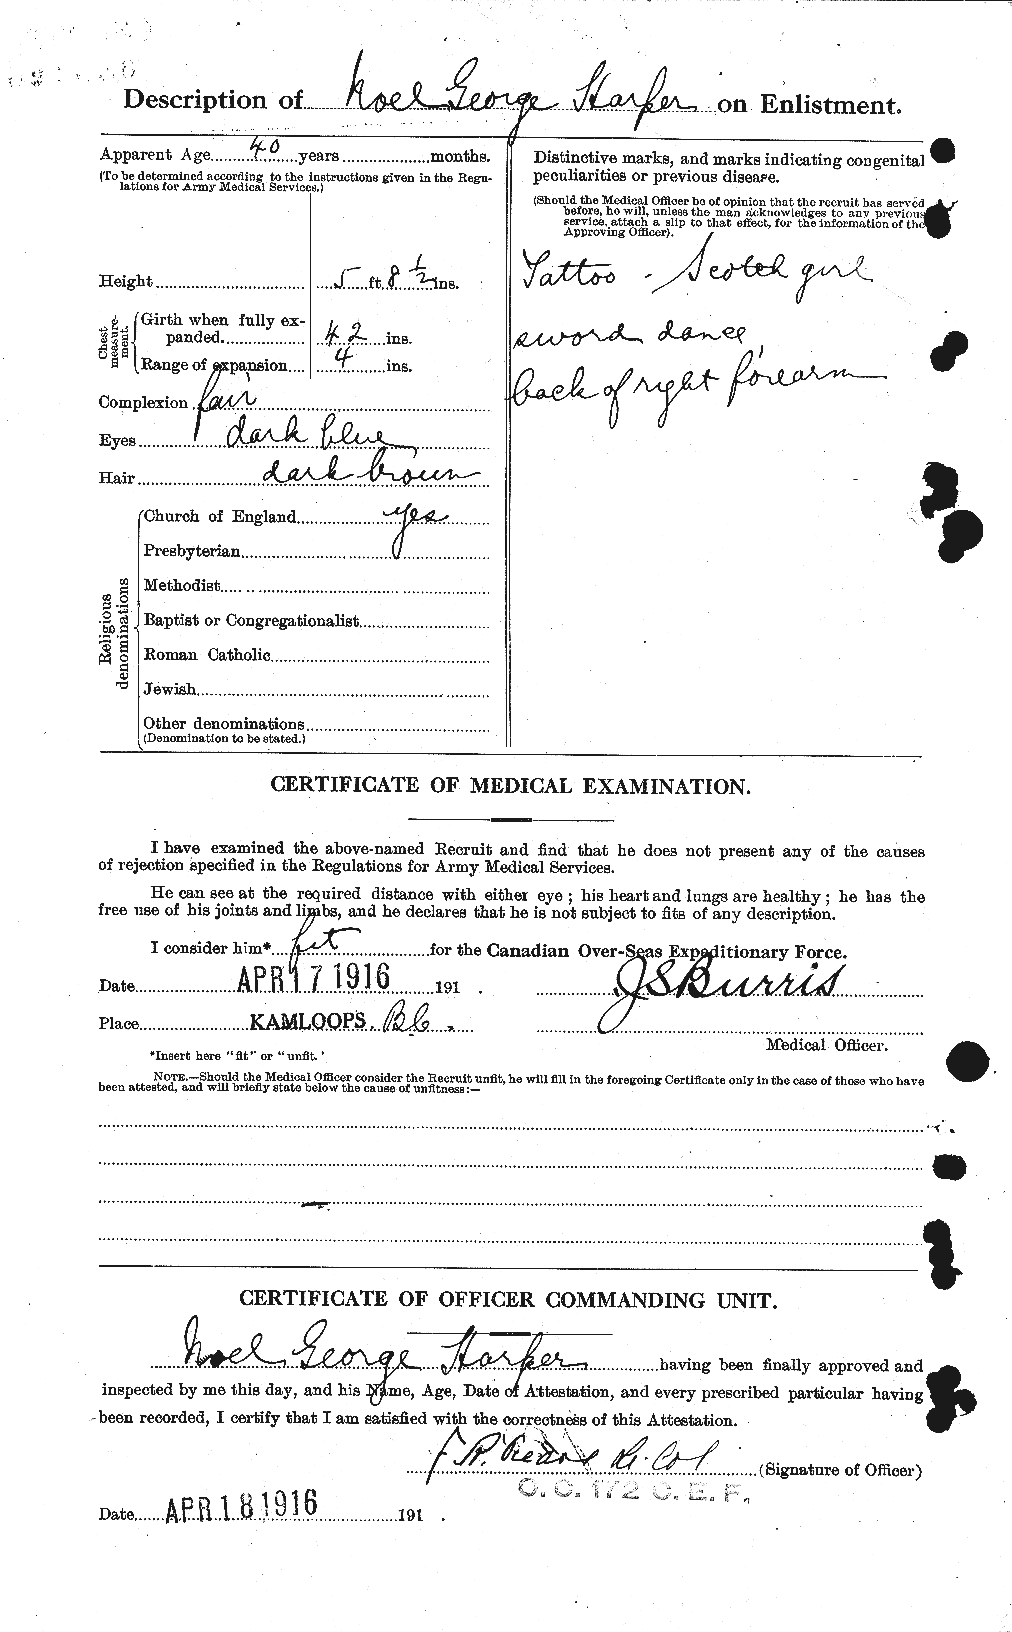 Personnel Records of the First World War - CEF 375407b